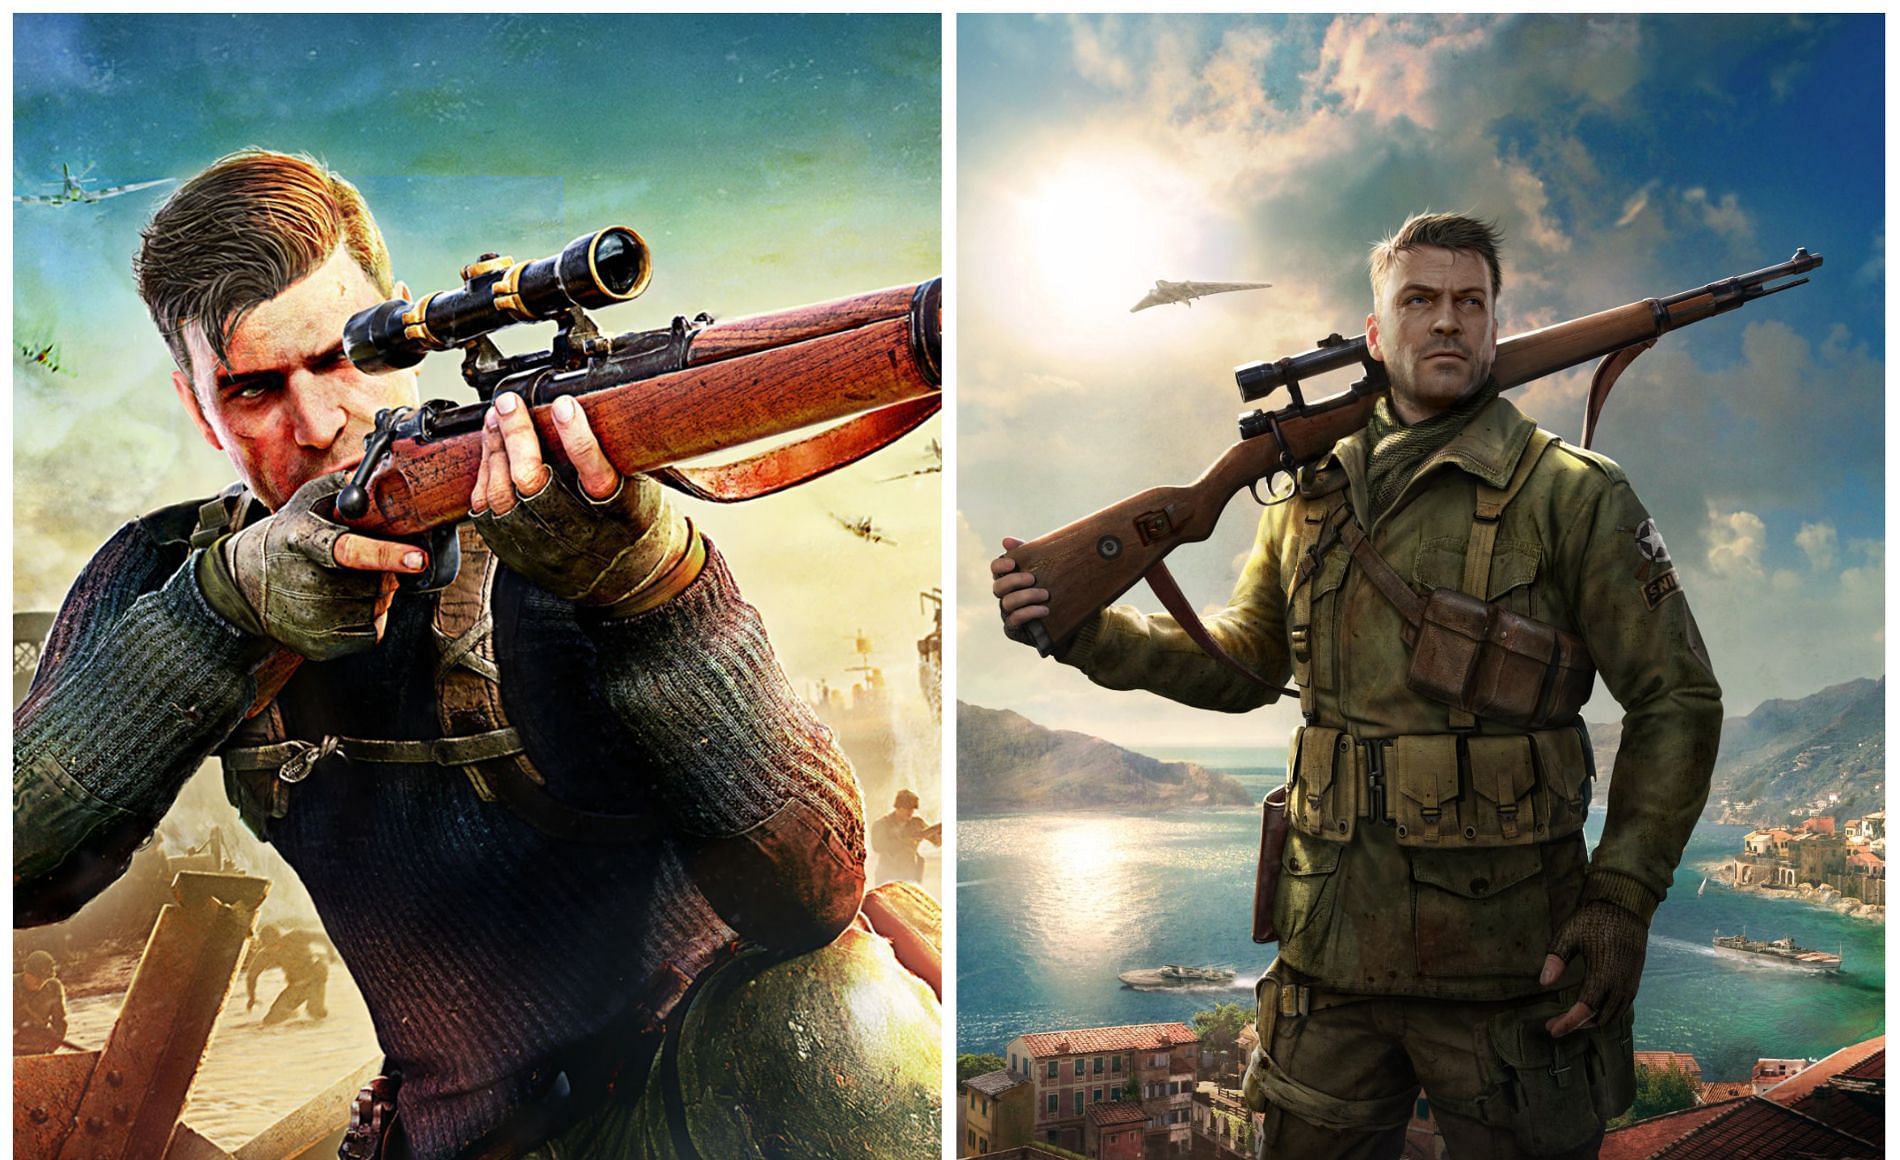 Sniper Elite video games offer a realistic and nuanced approach to shooting combat (Images via Rebellion)